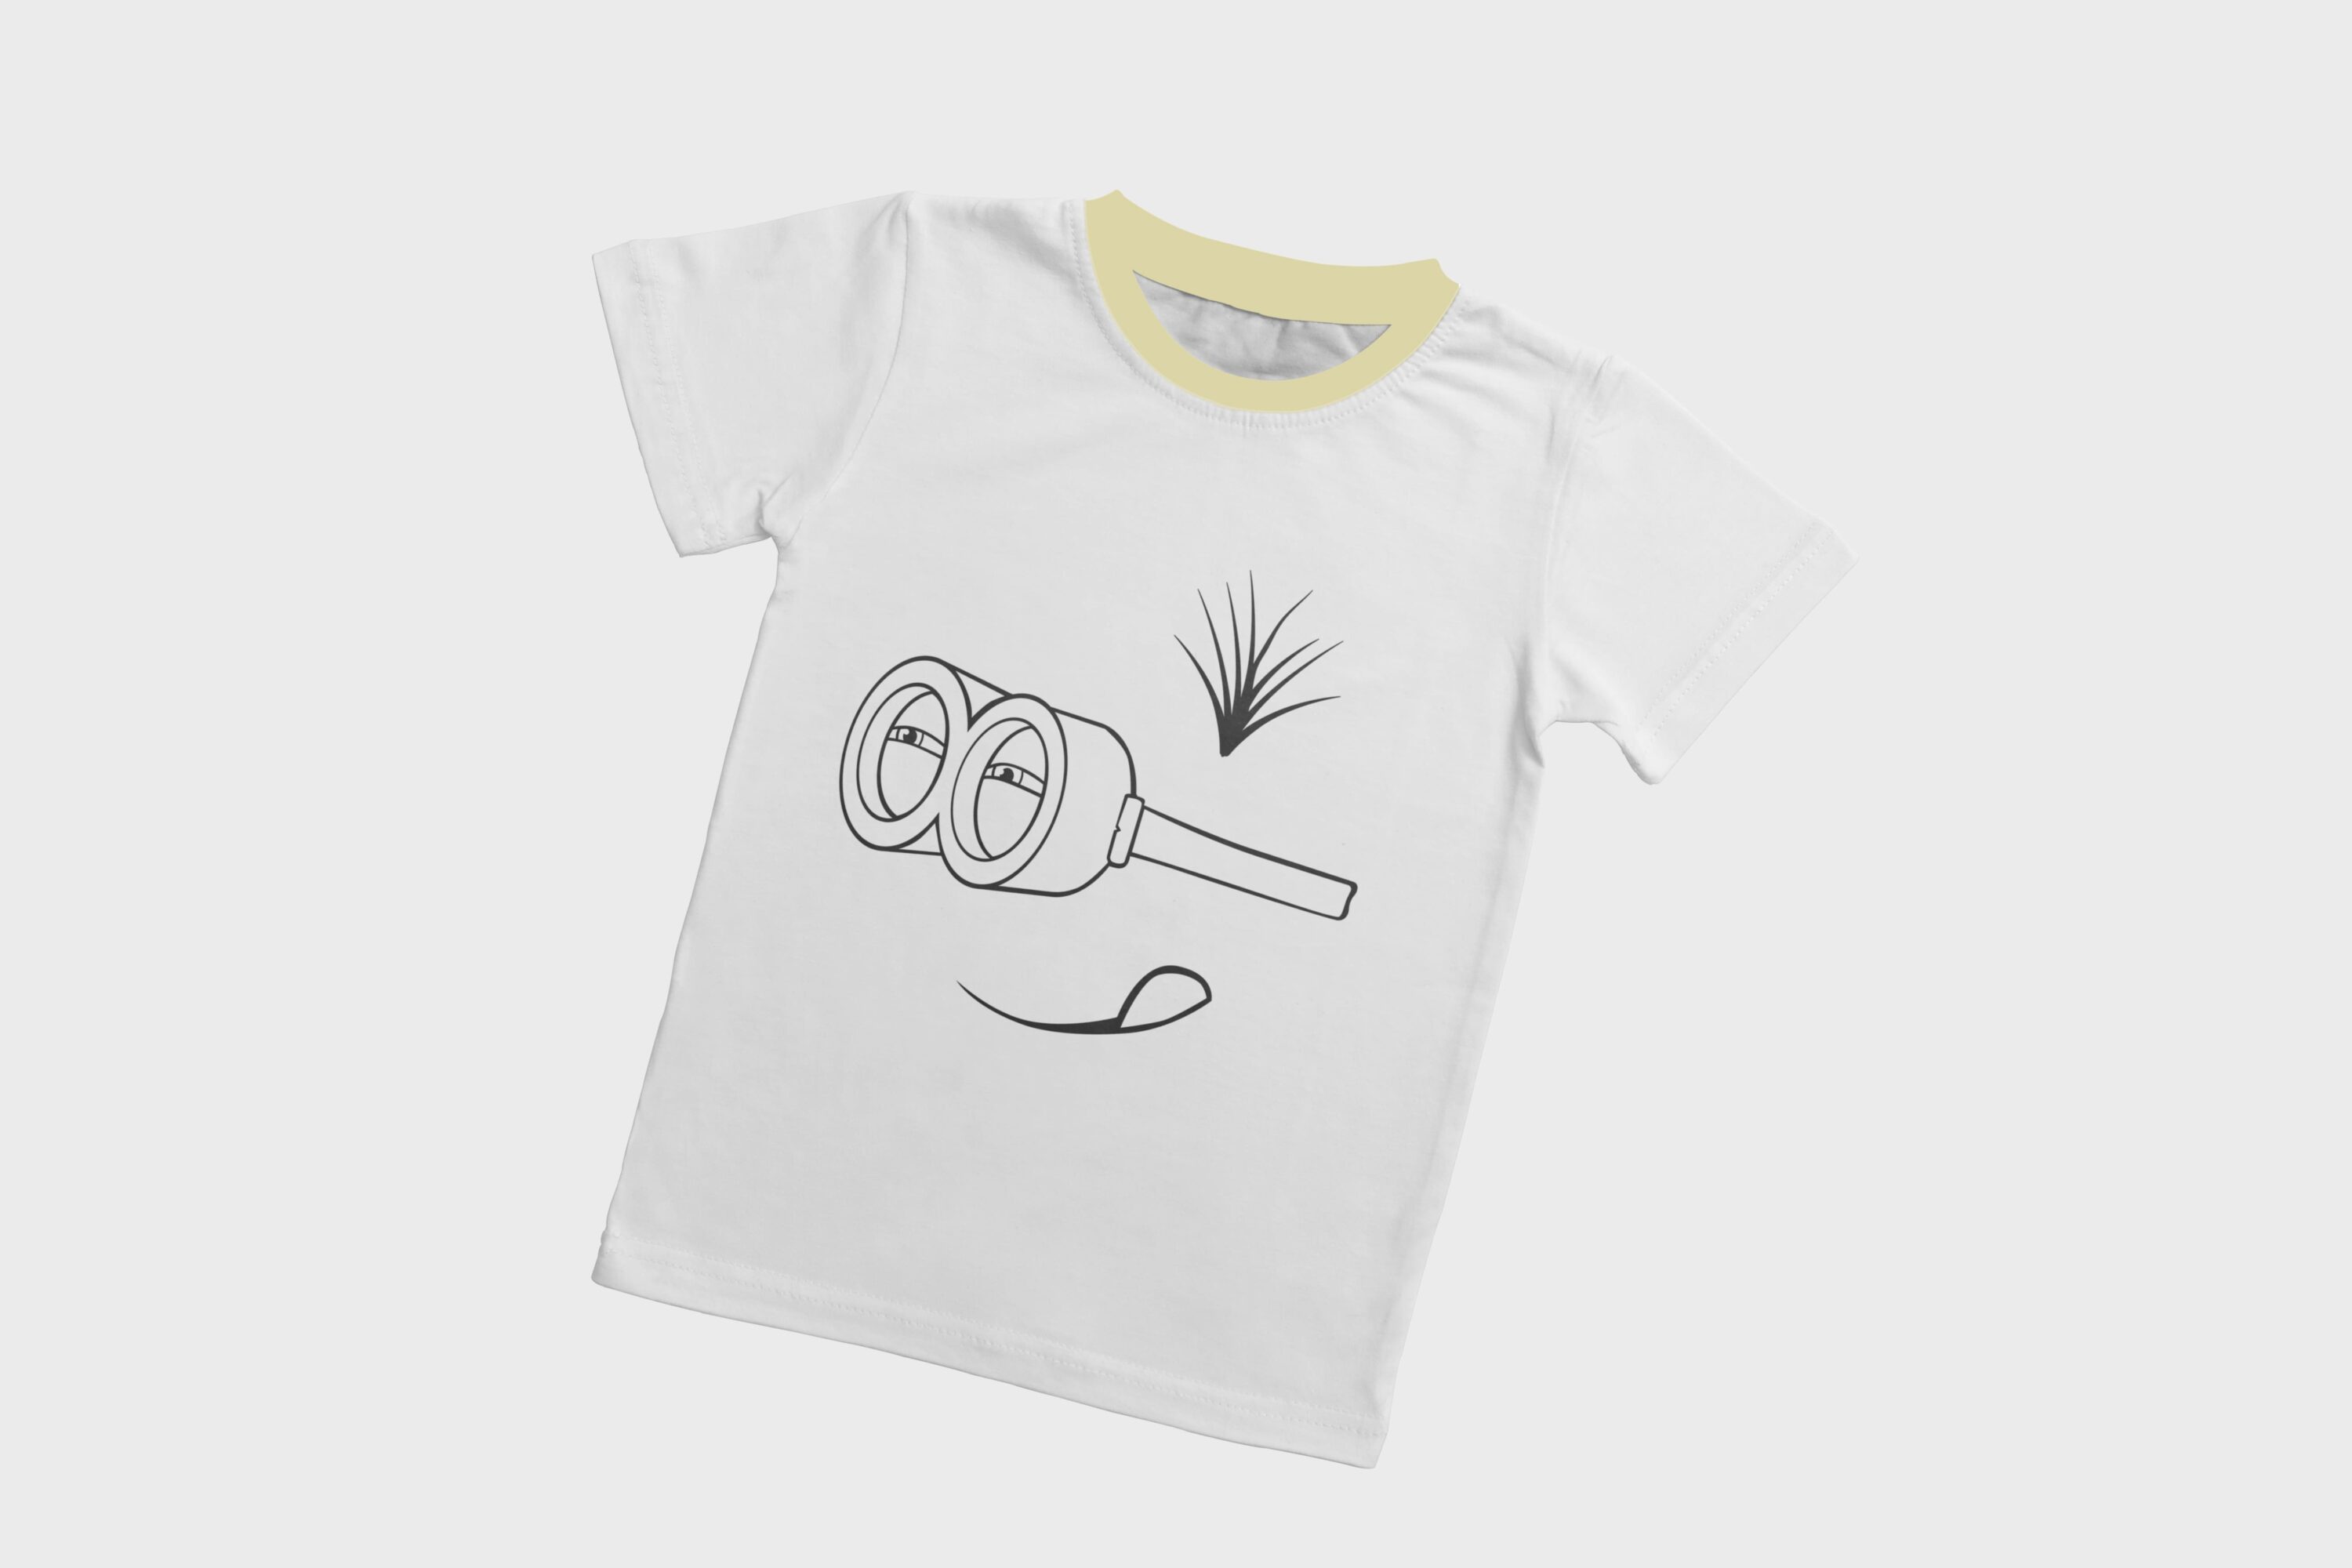 A white T-shirt with a dirty yellow collar and a silhouette face of a interested minion.